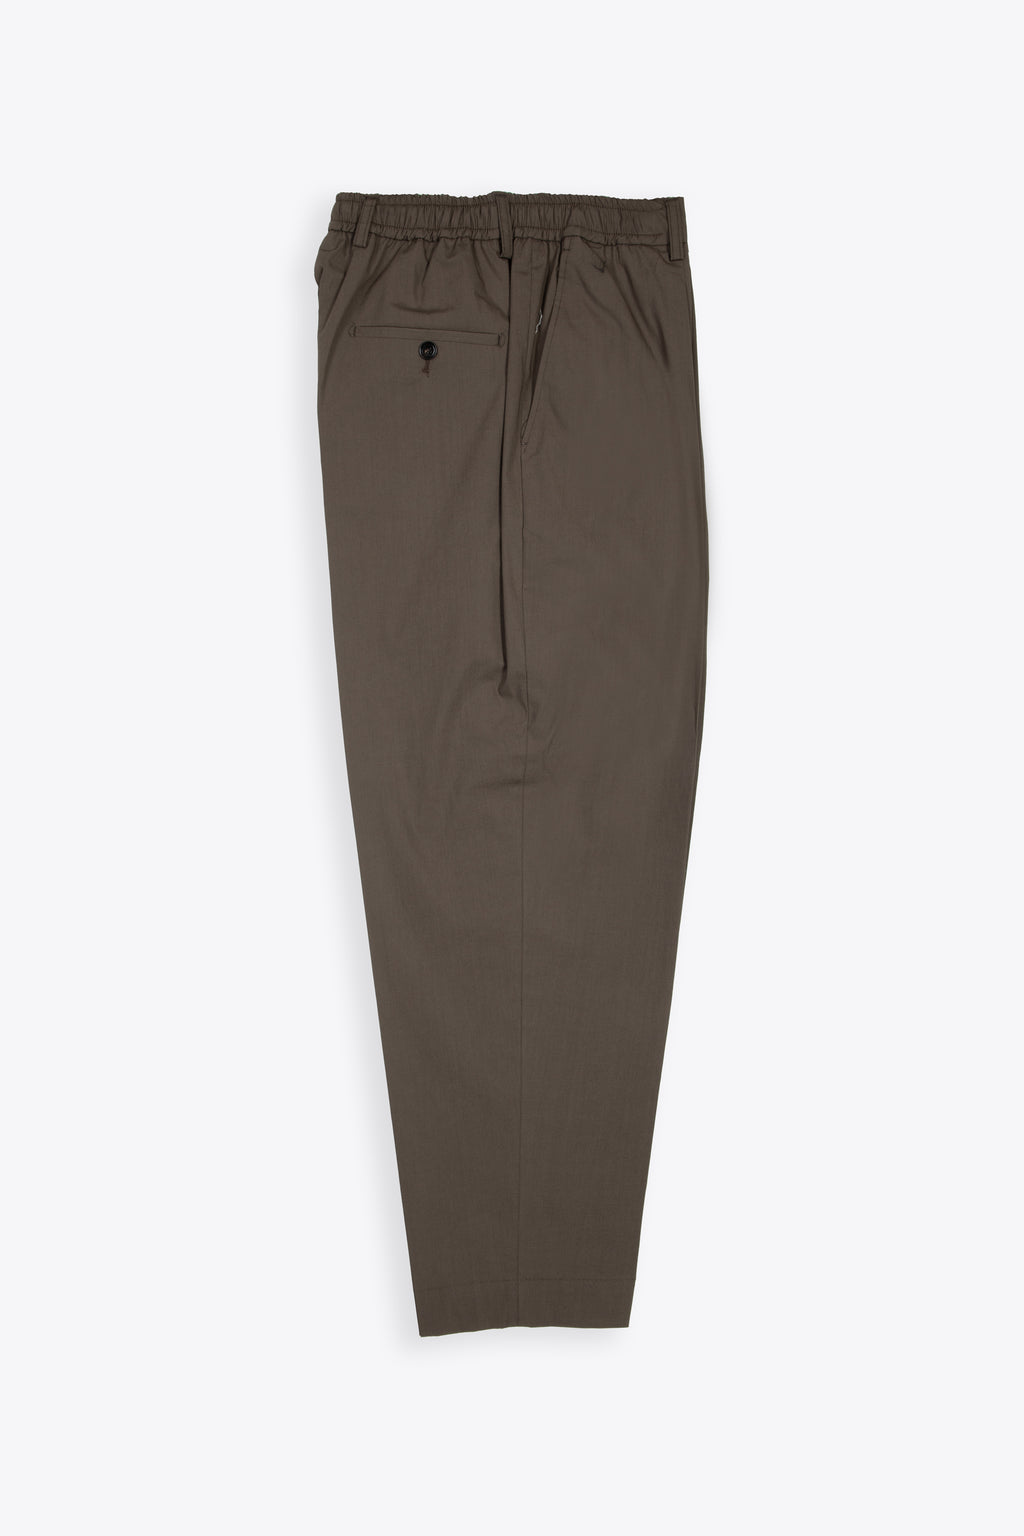 alt-image__Brown-cotton-cropped-pant-with-elastic-waistband